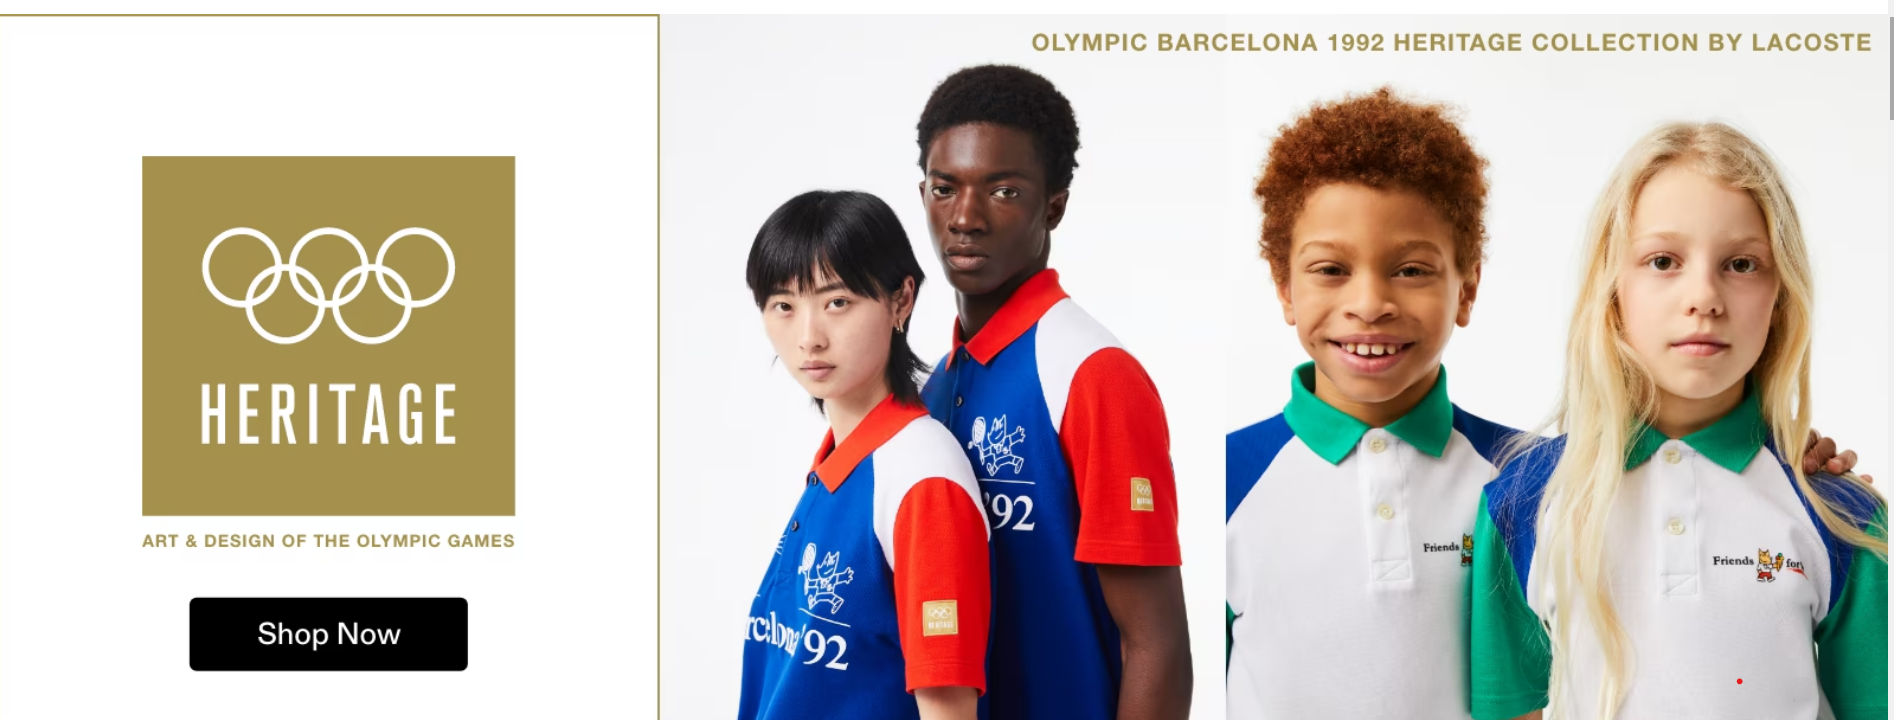 Lacoste and the IOC have launched a new range of apparel celebrating the 1992 Barcelona Olympics ©IOC